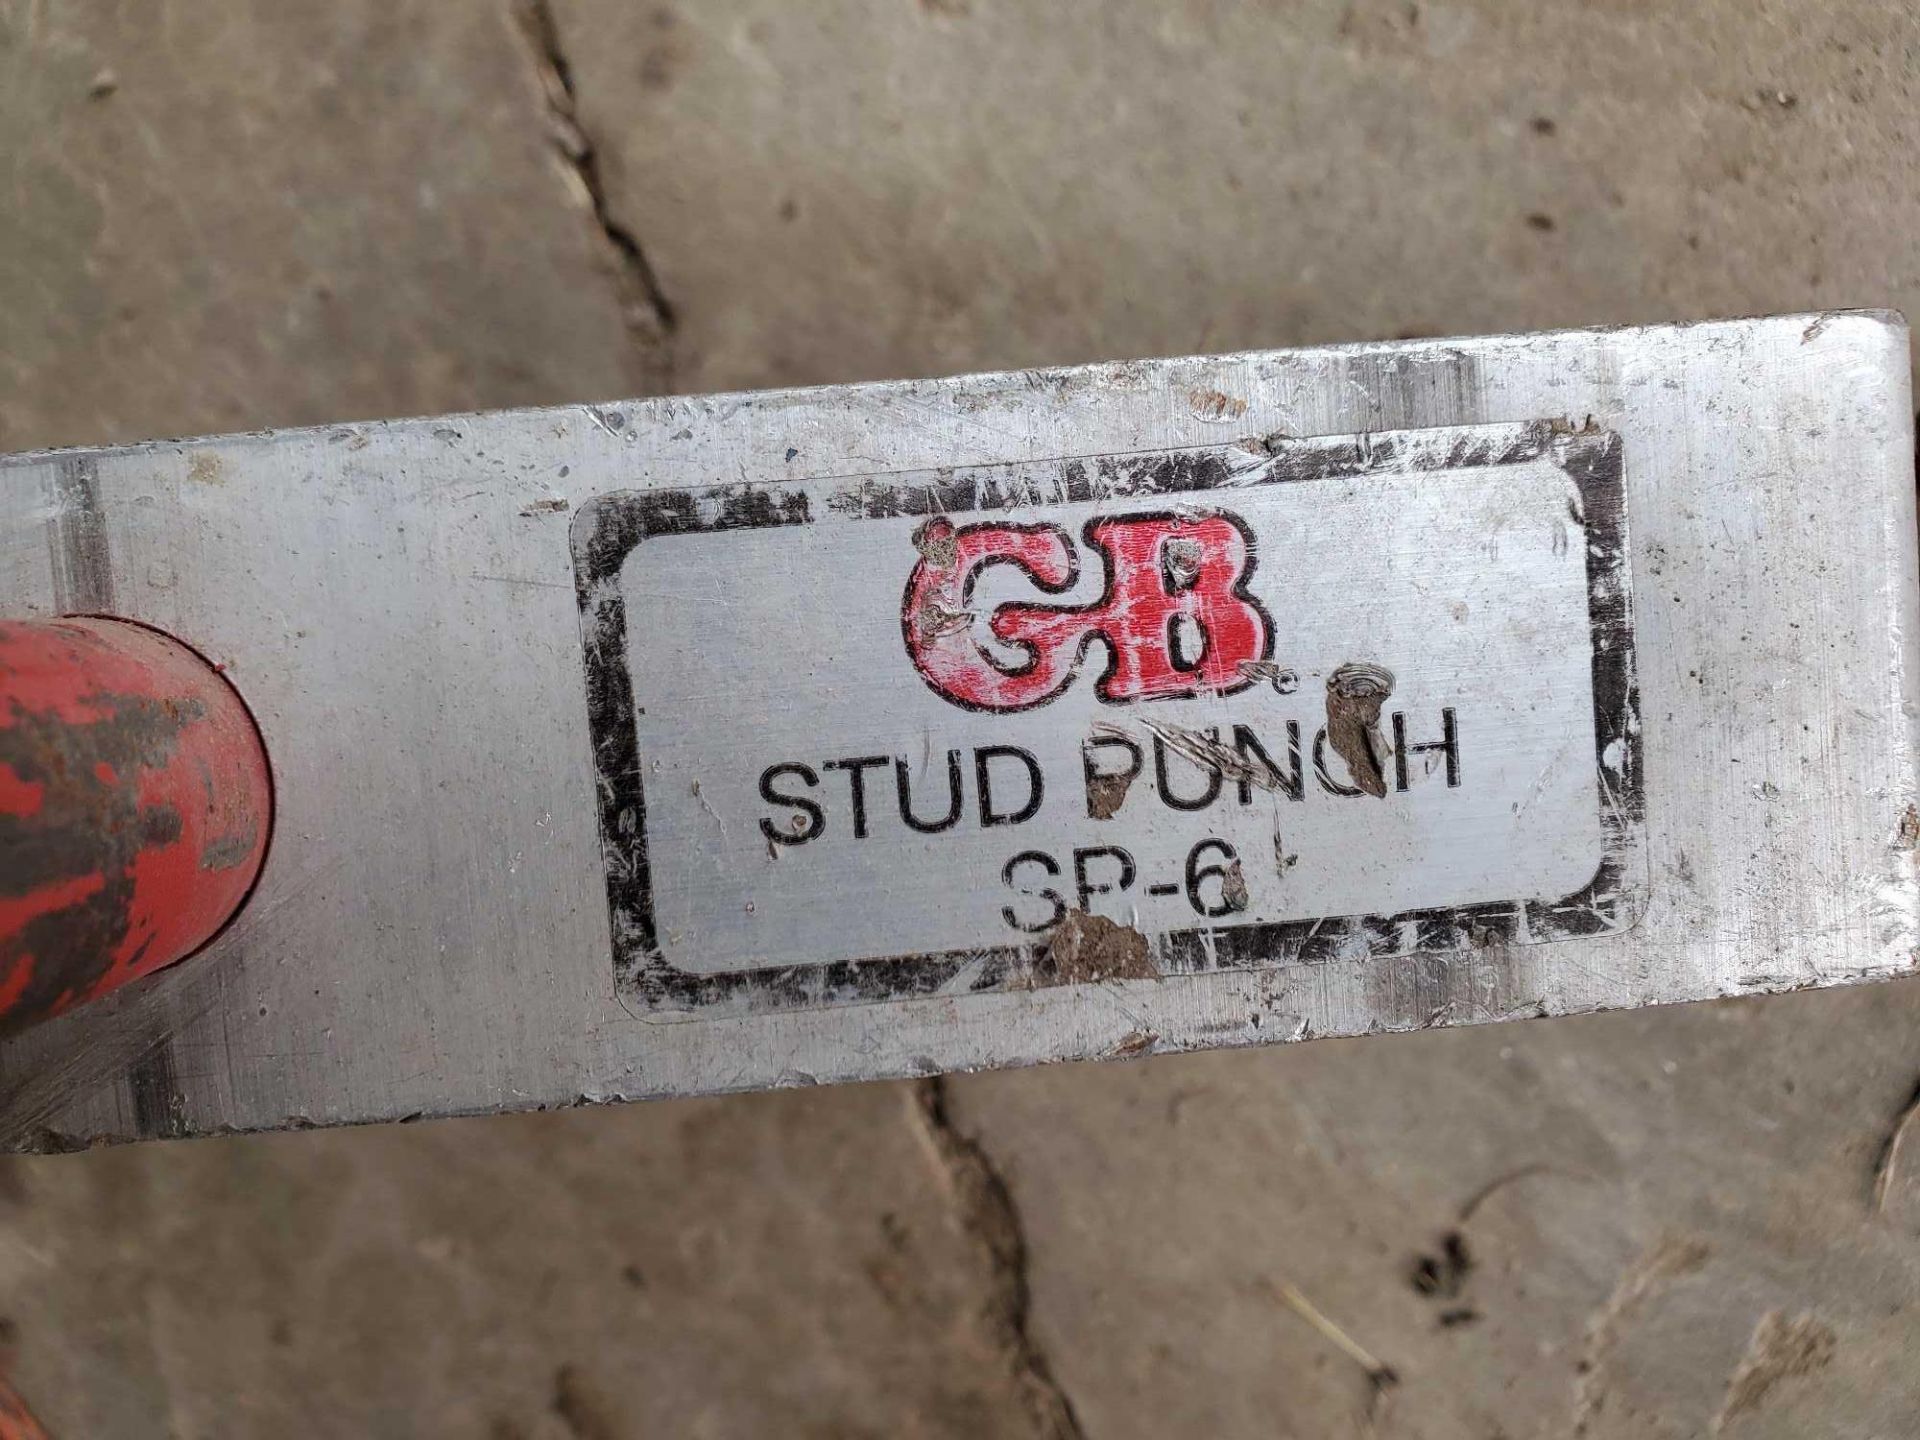 GB stud punch sp-6 / poincon GB sp-6 - Image 2 of 2